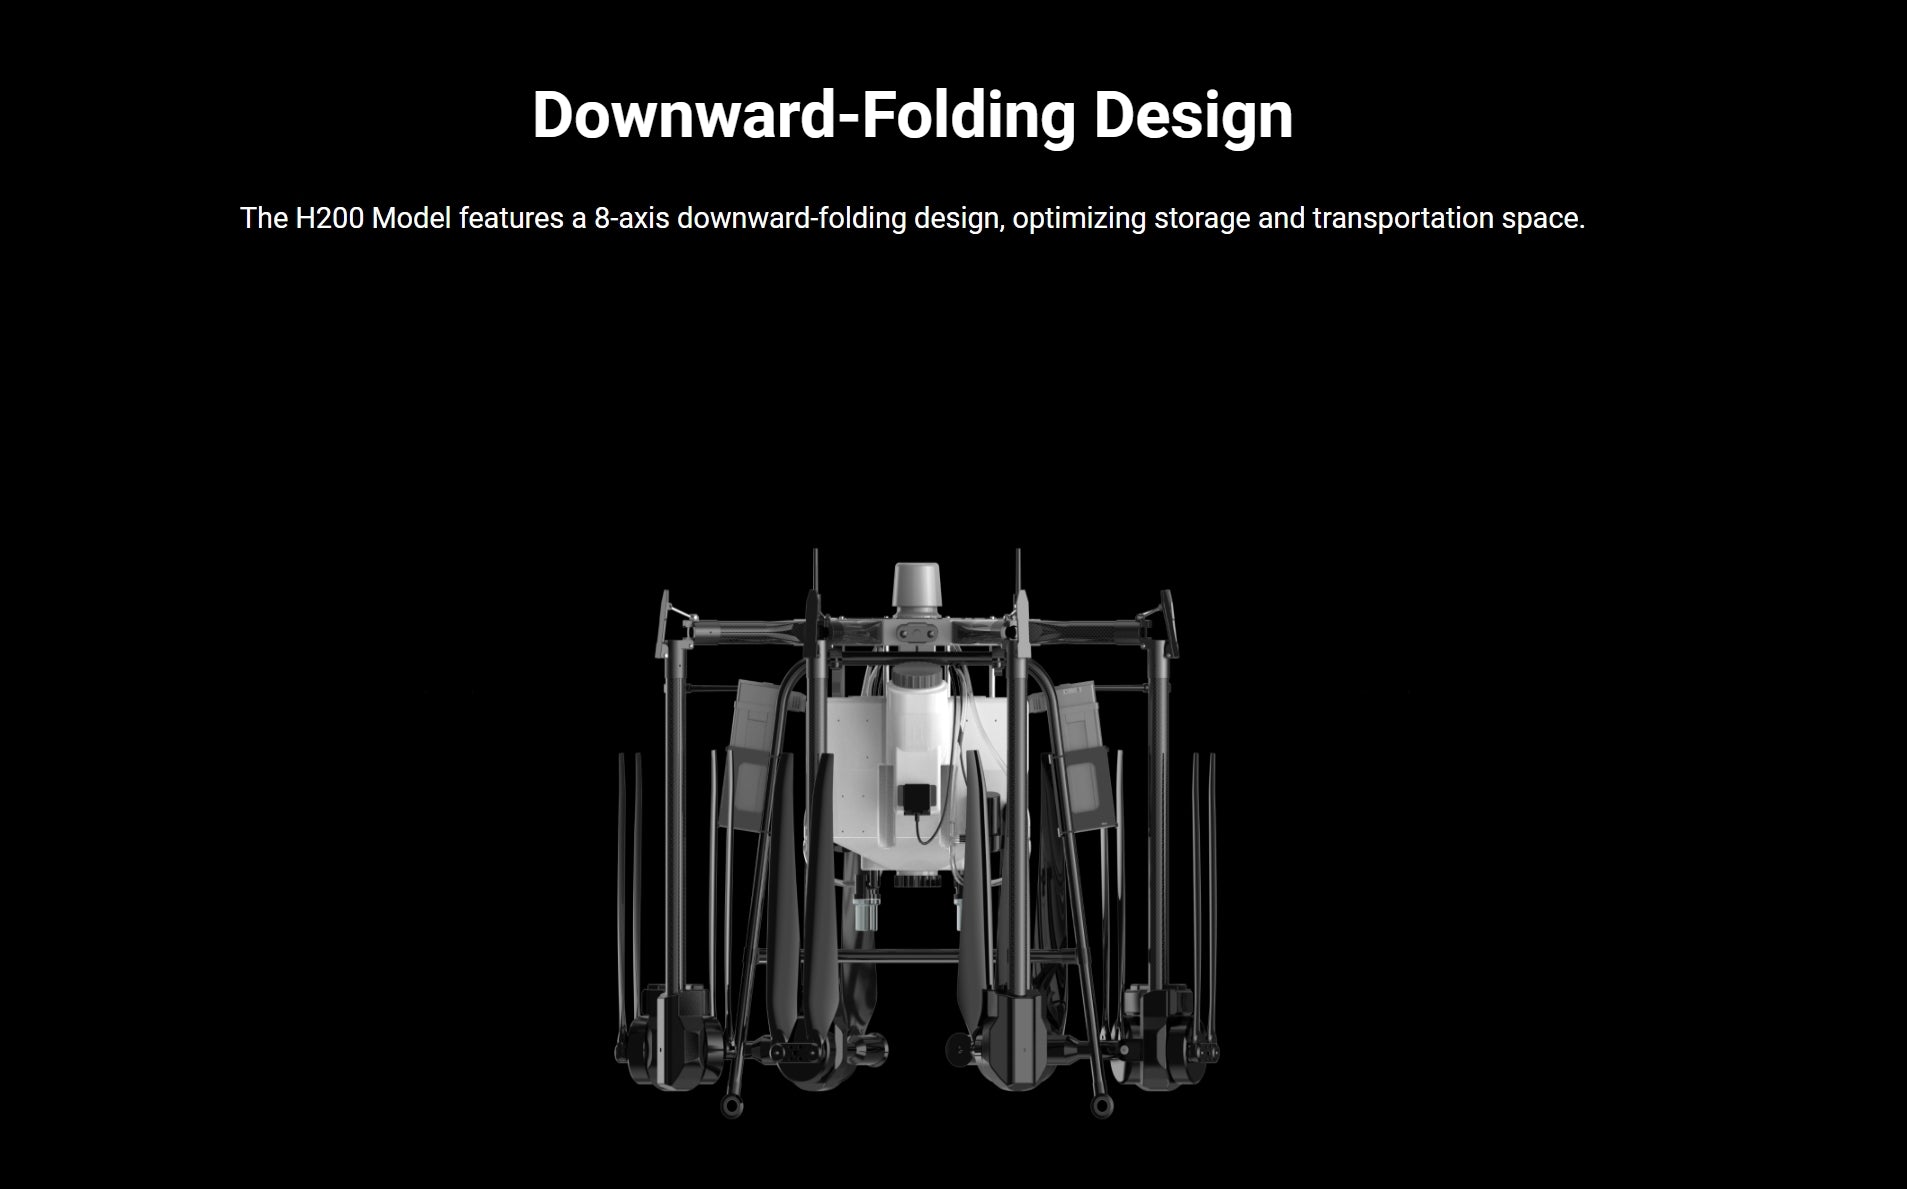 H200 Agricultural / Transport Drone, Downward-Folding Design The H2OO Model features a 8-axis